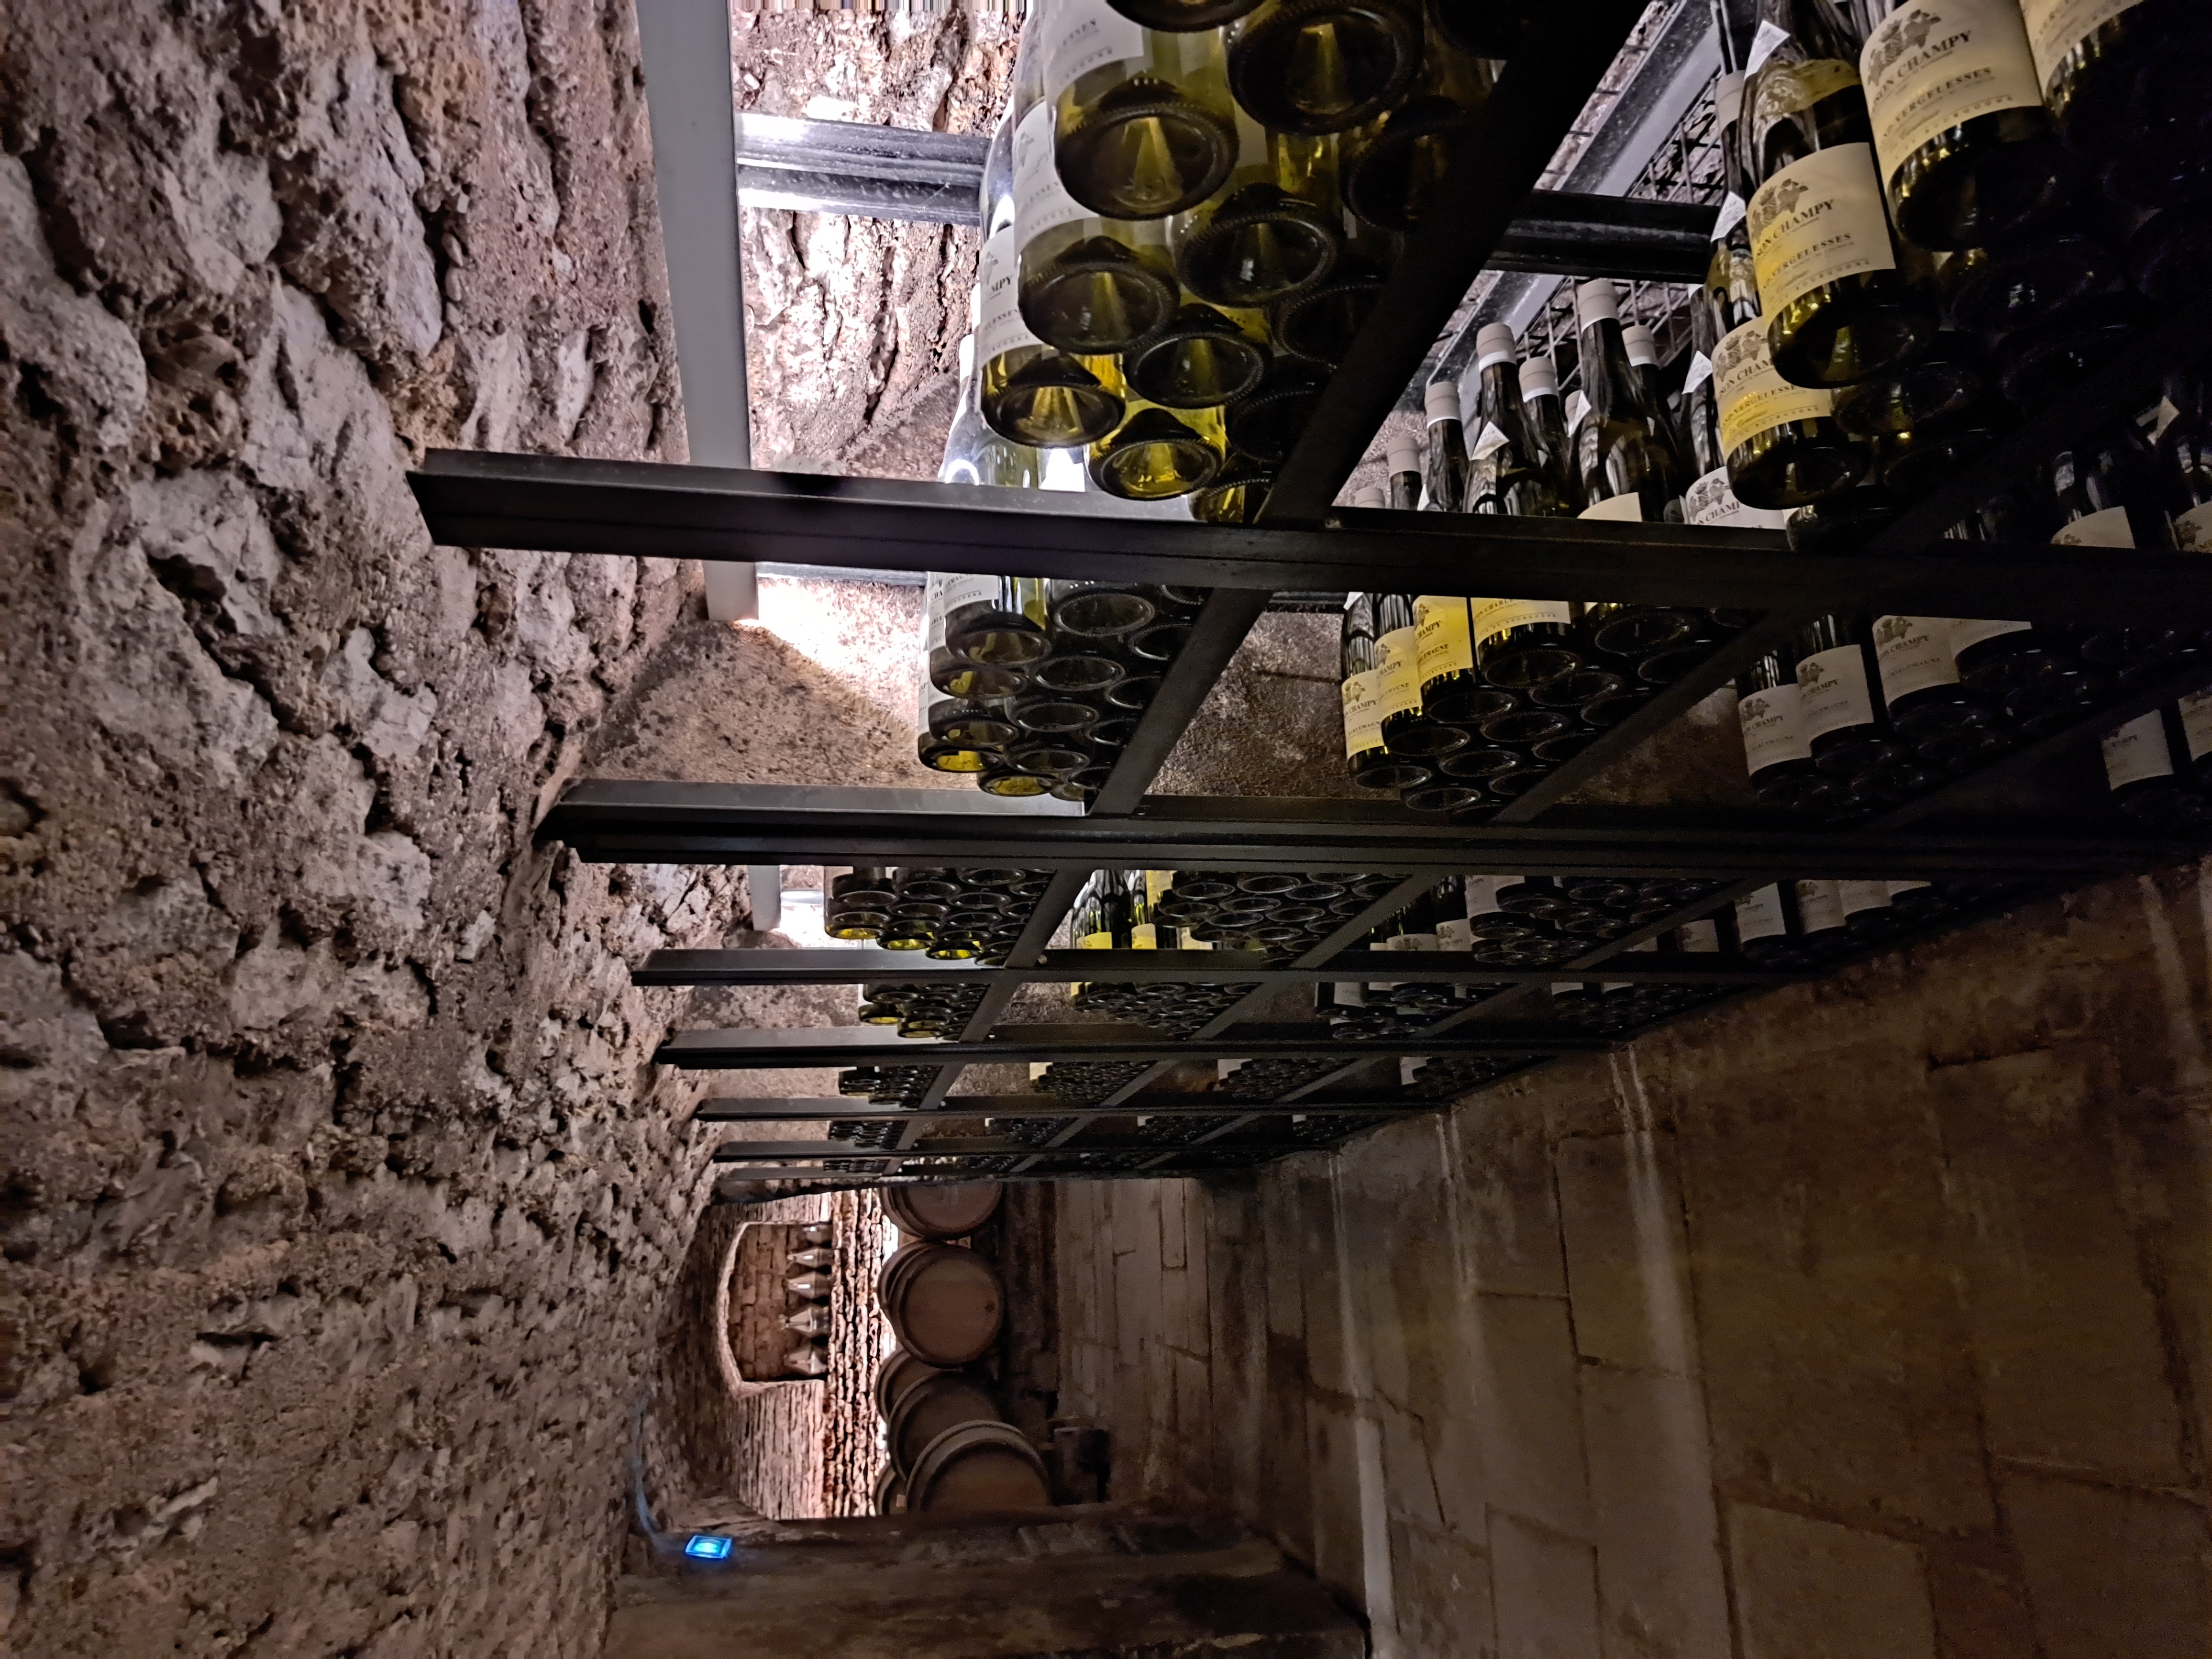 Bottle ageing at Maison Champy in Beaune, Burgundy